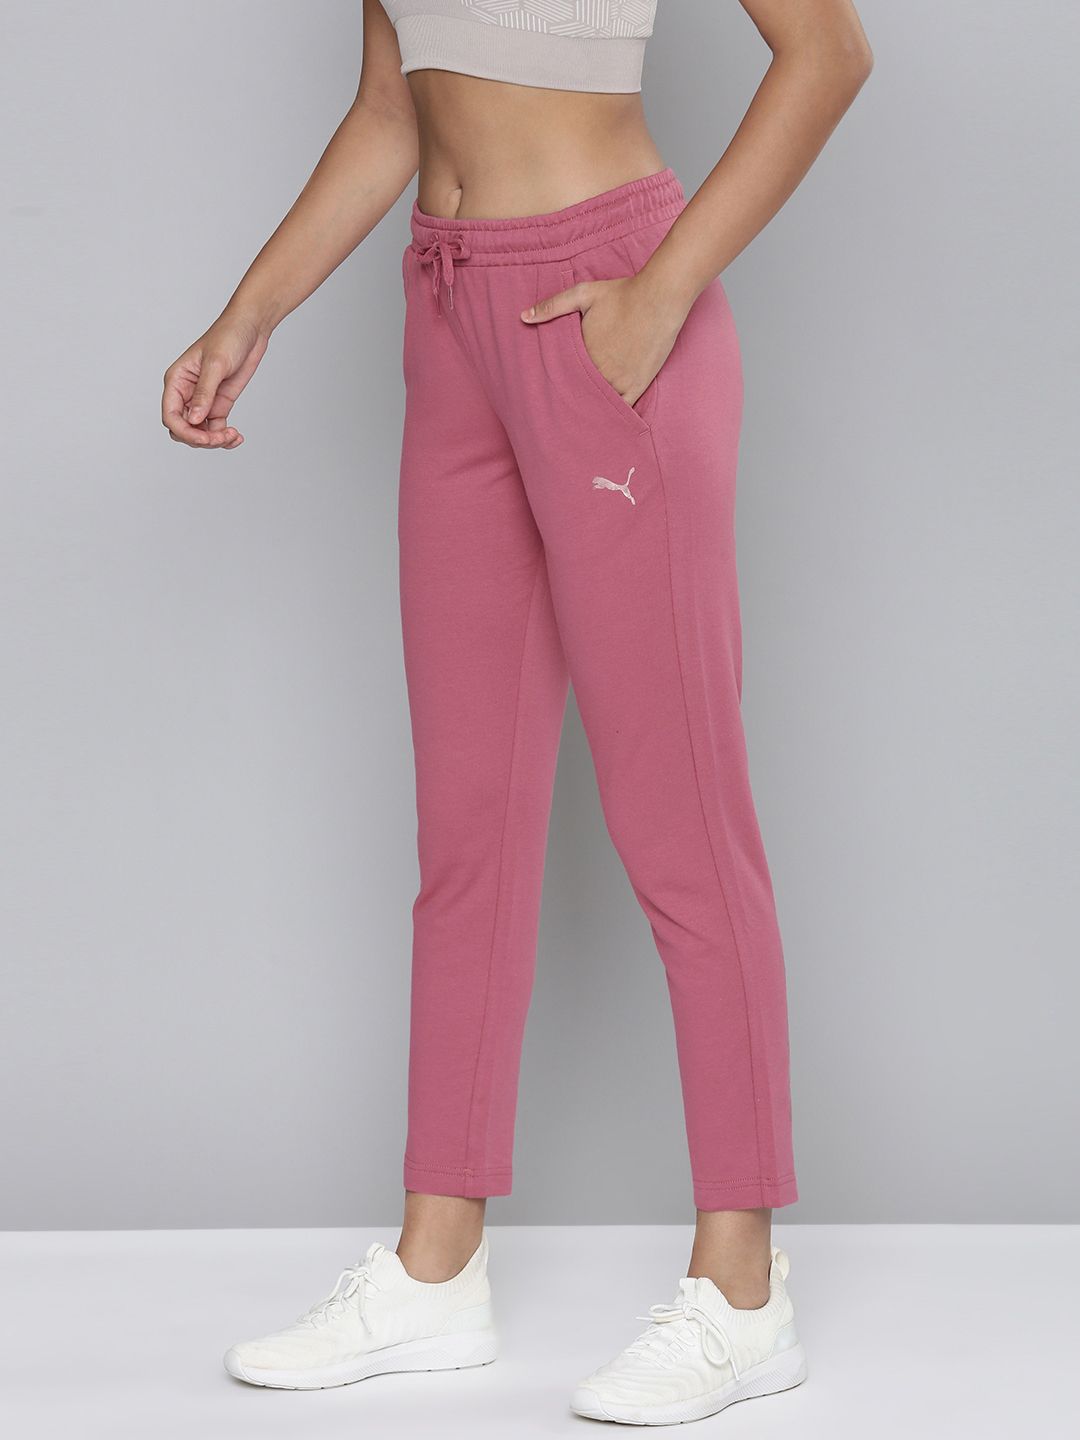 Puma Women Pink Brand Logo Printed 7/8 Regular Fit Knitted Track Pants Price in India